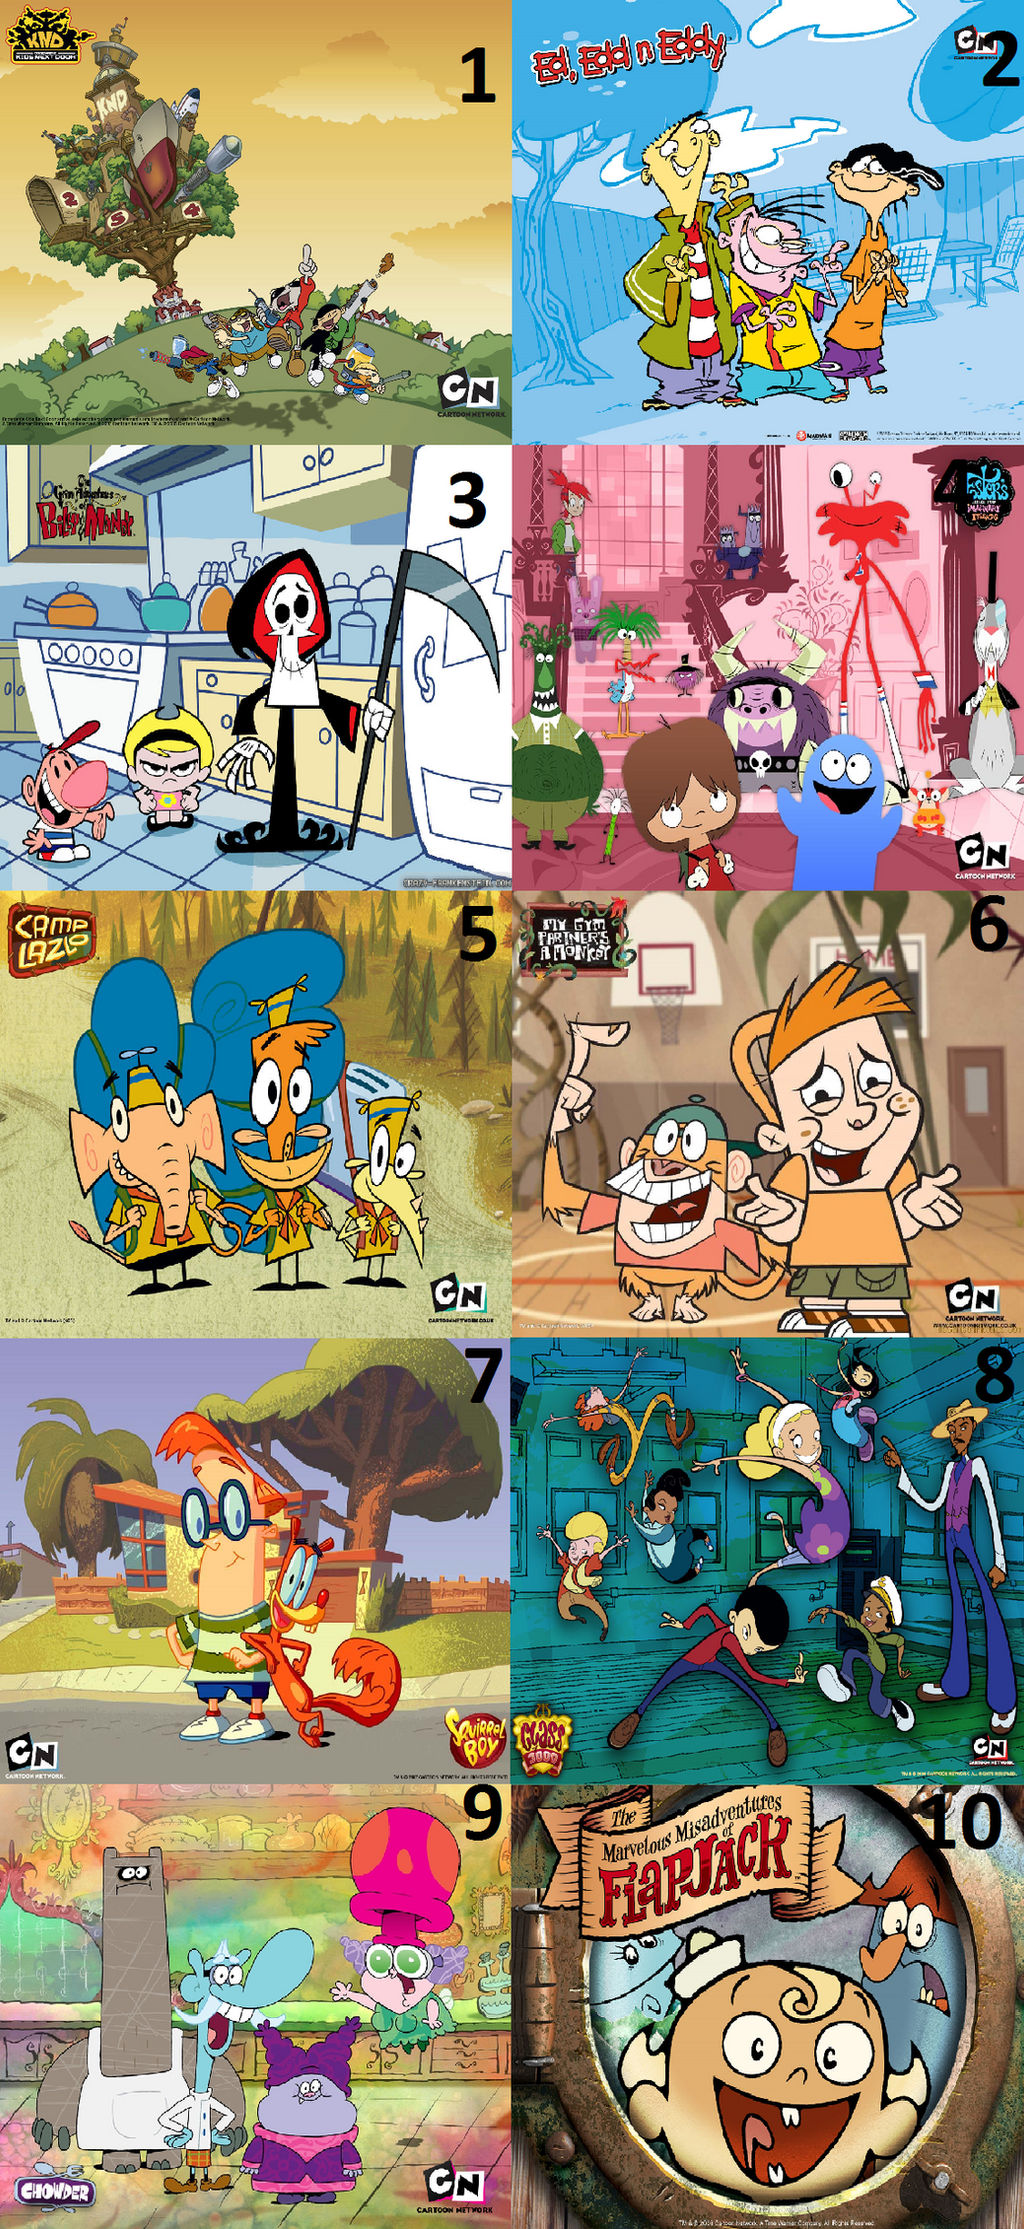 My Top 10 Favorite Old Cartoon Network Shows